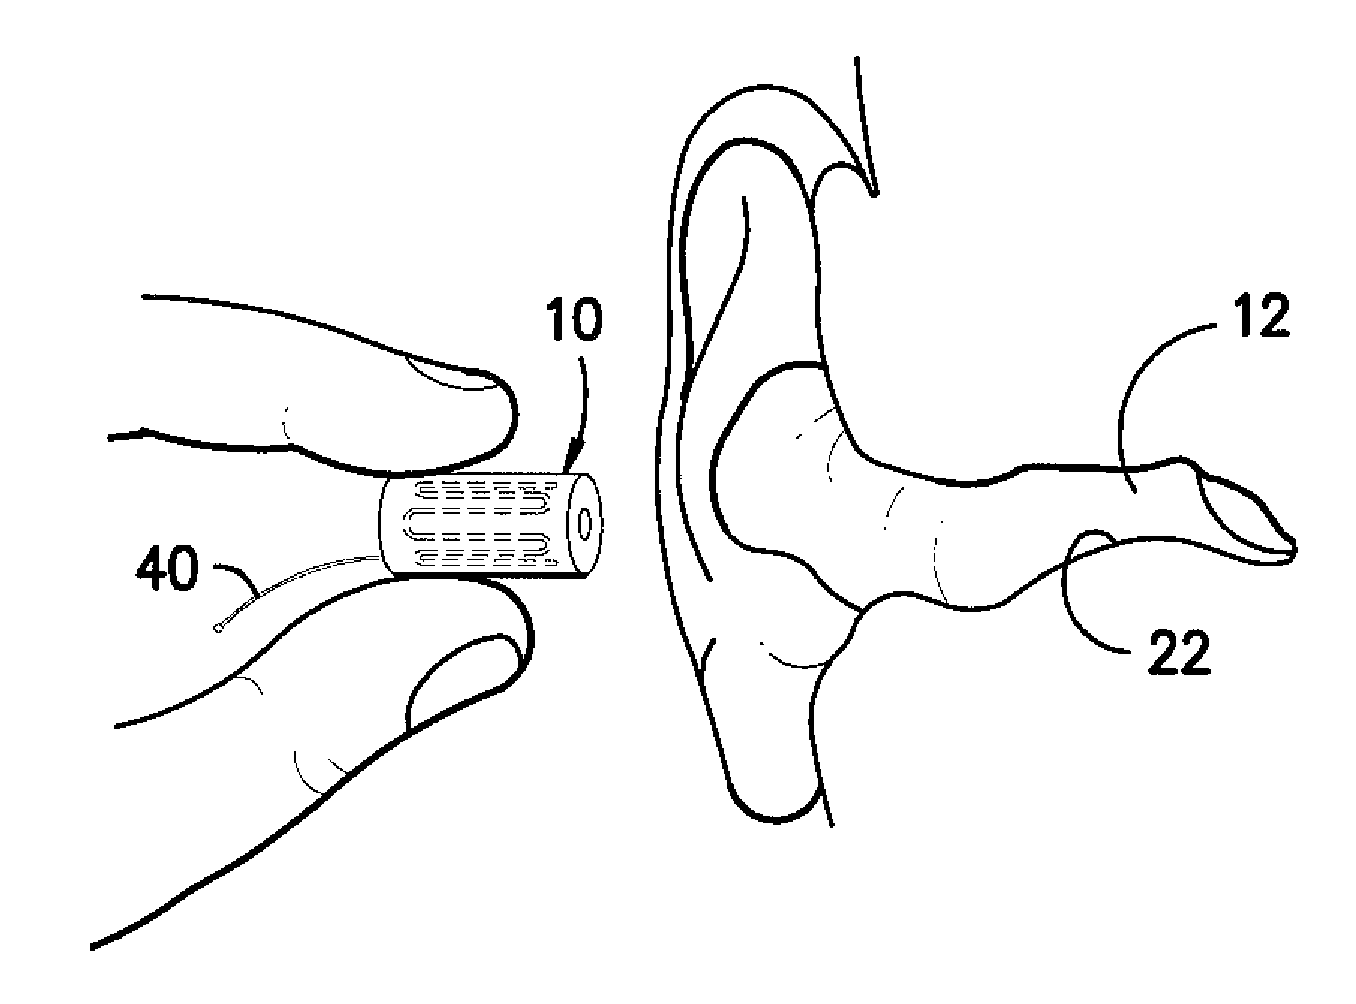 Ear insert for relief of tmj discomfort and headaches